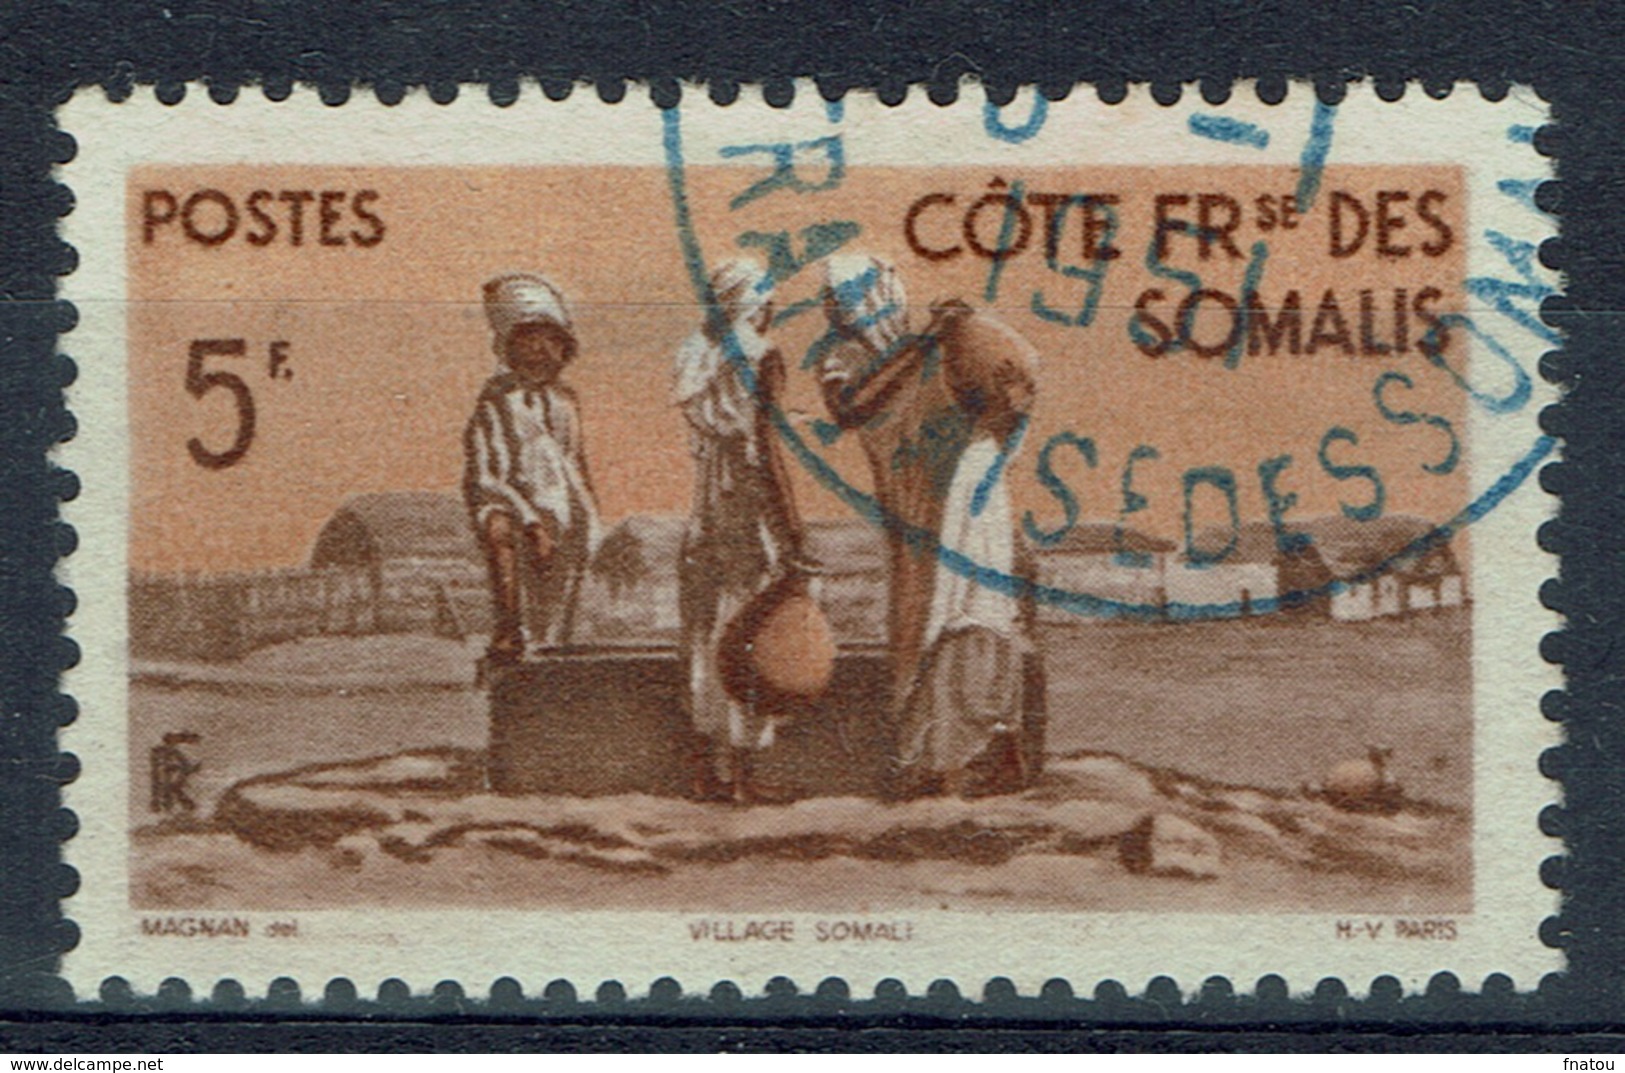 French Somali Coast, 5f., Village And Well, 1947, VFU - Used Stamps